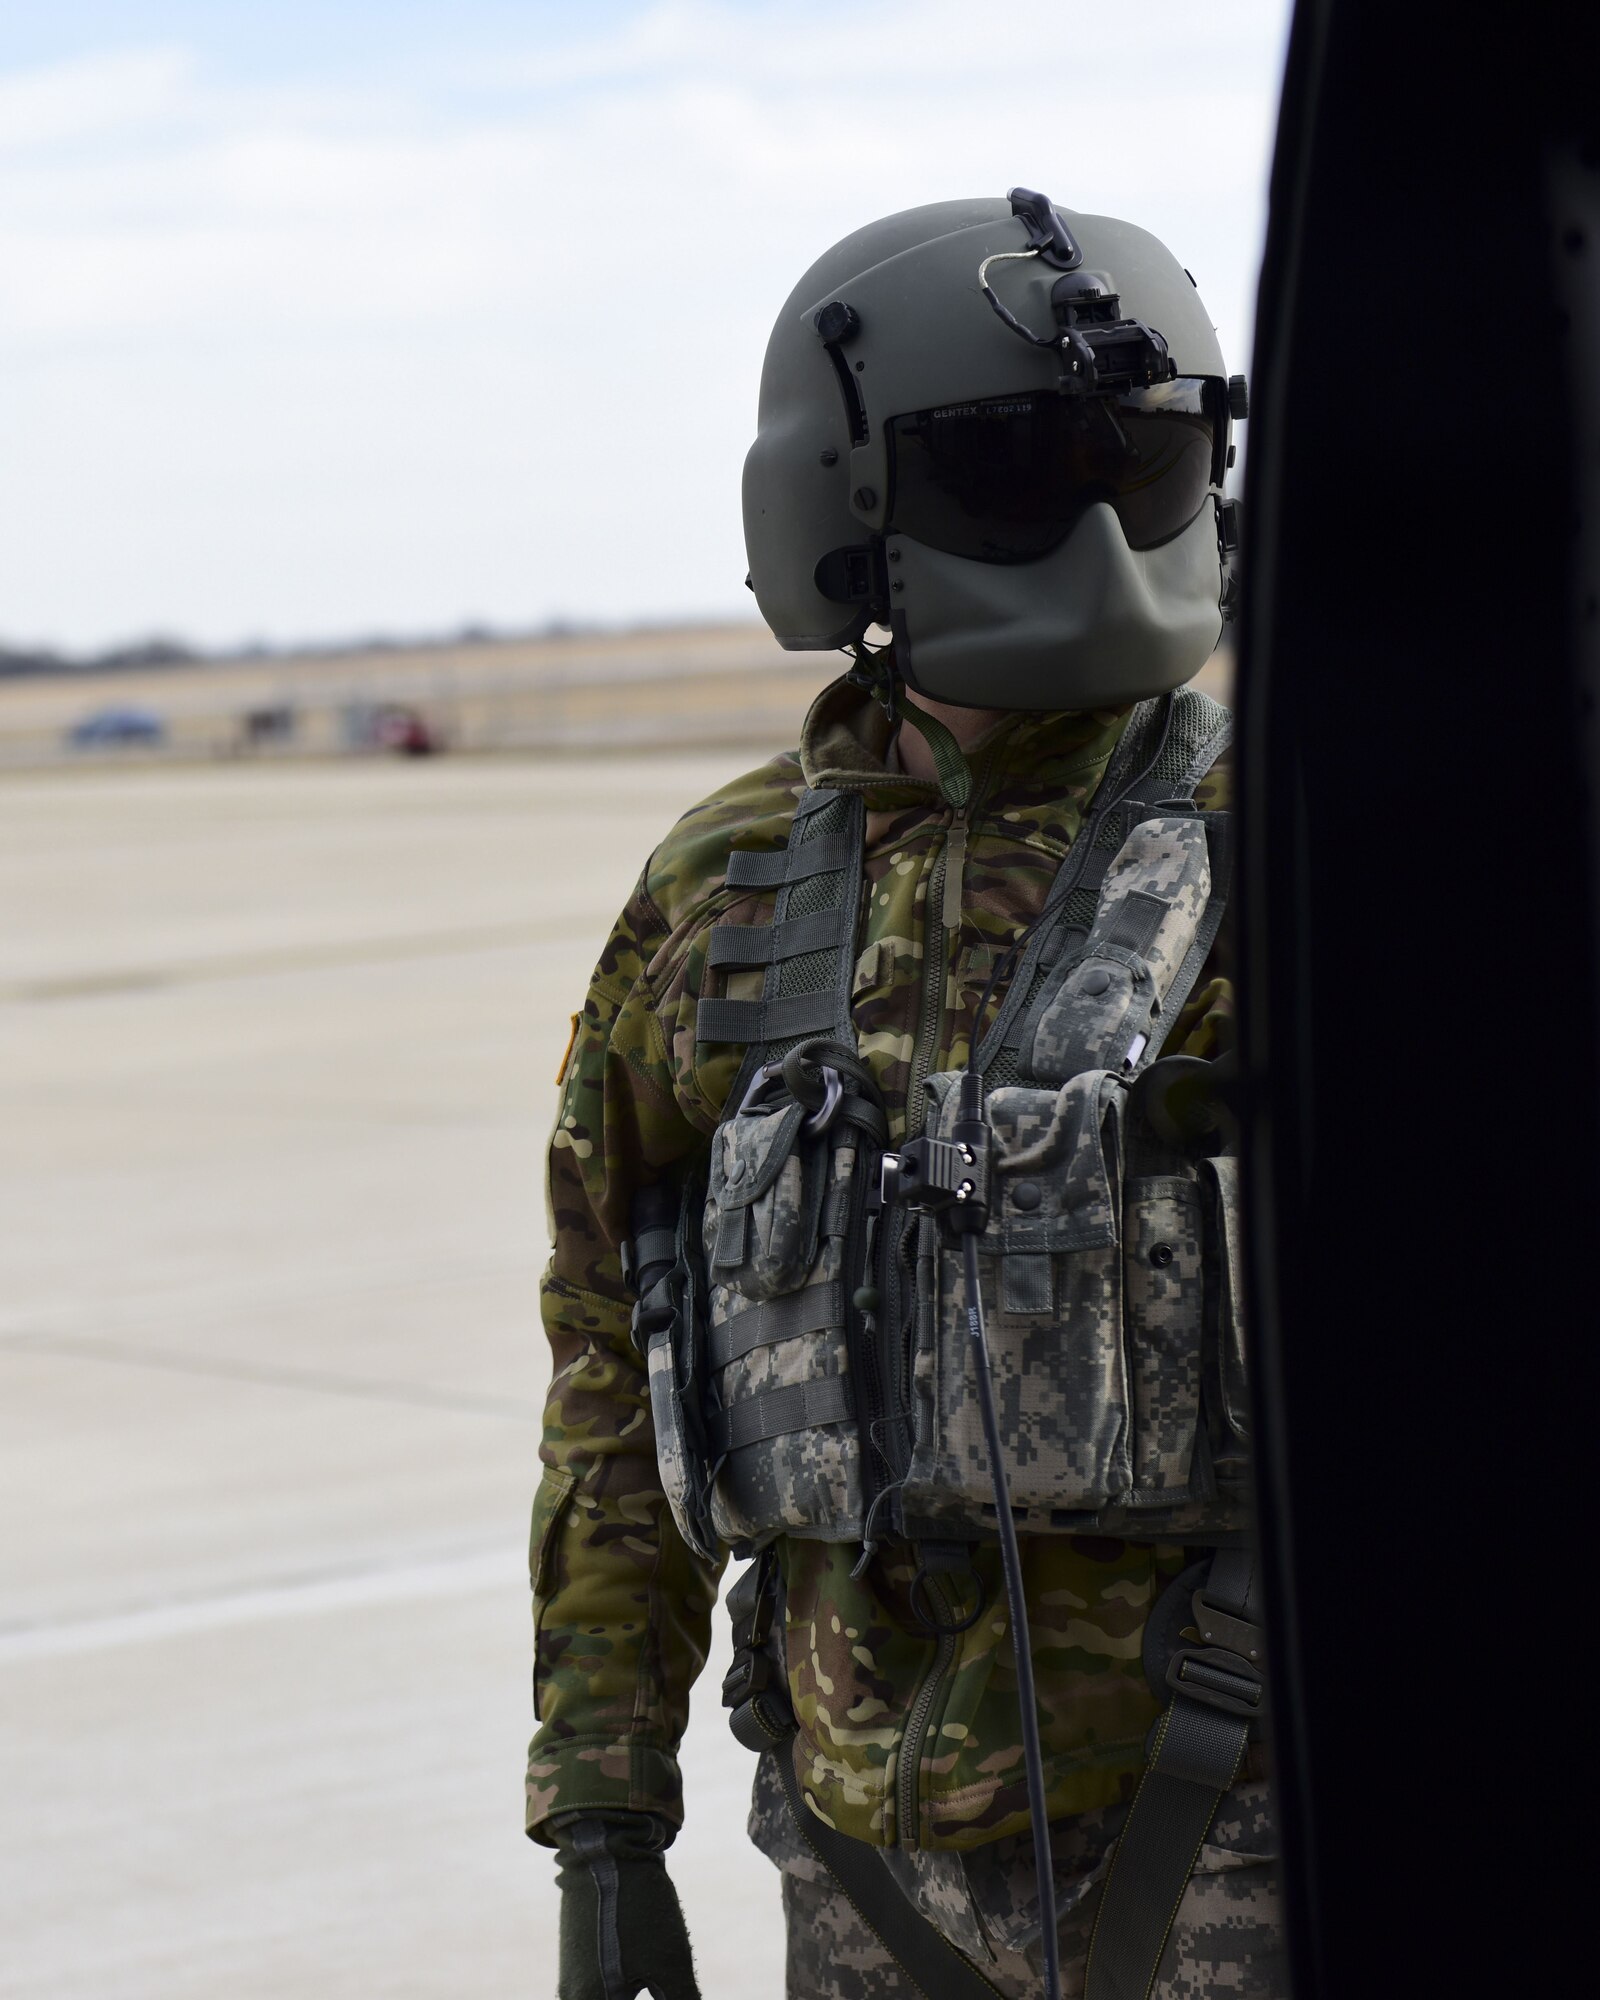 A U.S. Army crew chief with the 1-135th Assault Helicopter Battalion monitors a UH-60 Black Hawk before take off during a joint training at Whiteman Air Force Base, Mo., Jan. 31, 2018. In addition to establishing a partnership, the purpose of the training was to familiarize Joint Terminal Attack Controllers from the 7th Air Support Operations Squadron located in Fort Bliss, Texas, with the assets available at Whiteman AFB that are used in a multi-domain fight.